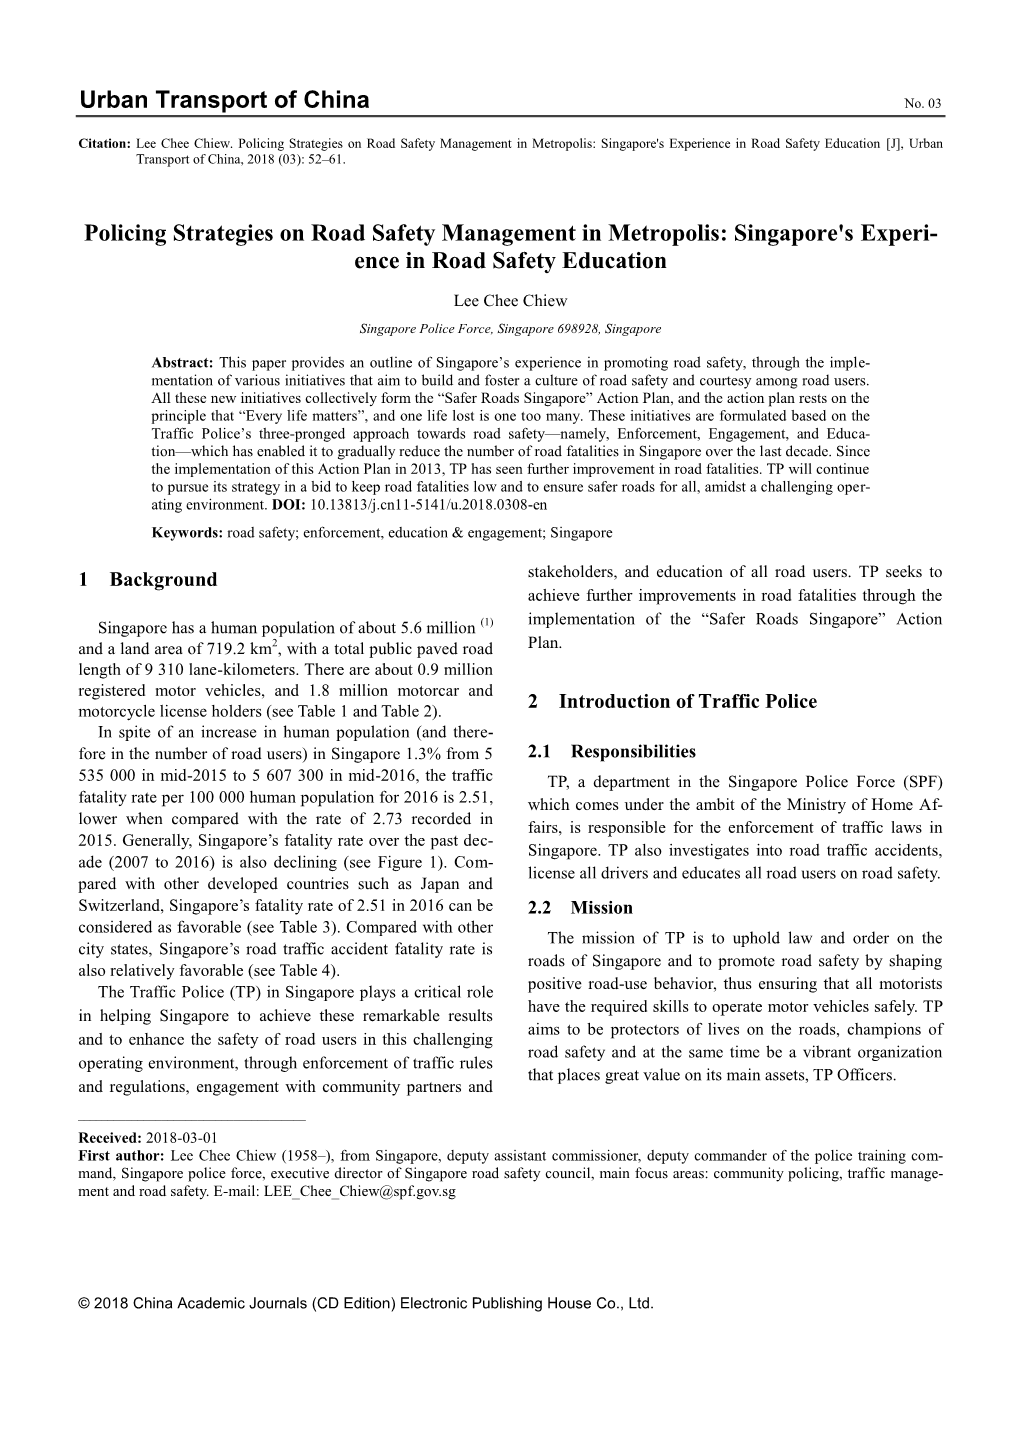 Urban Transport of China Policing Strategies on Road Safety